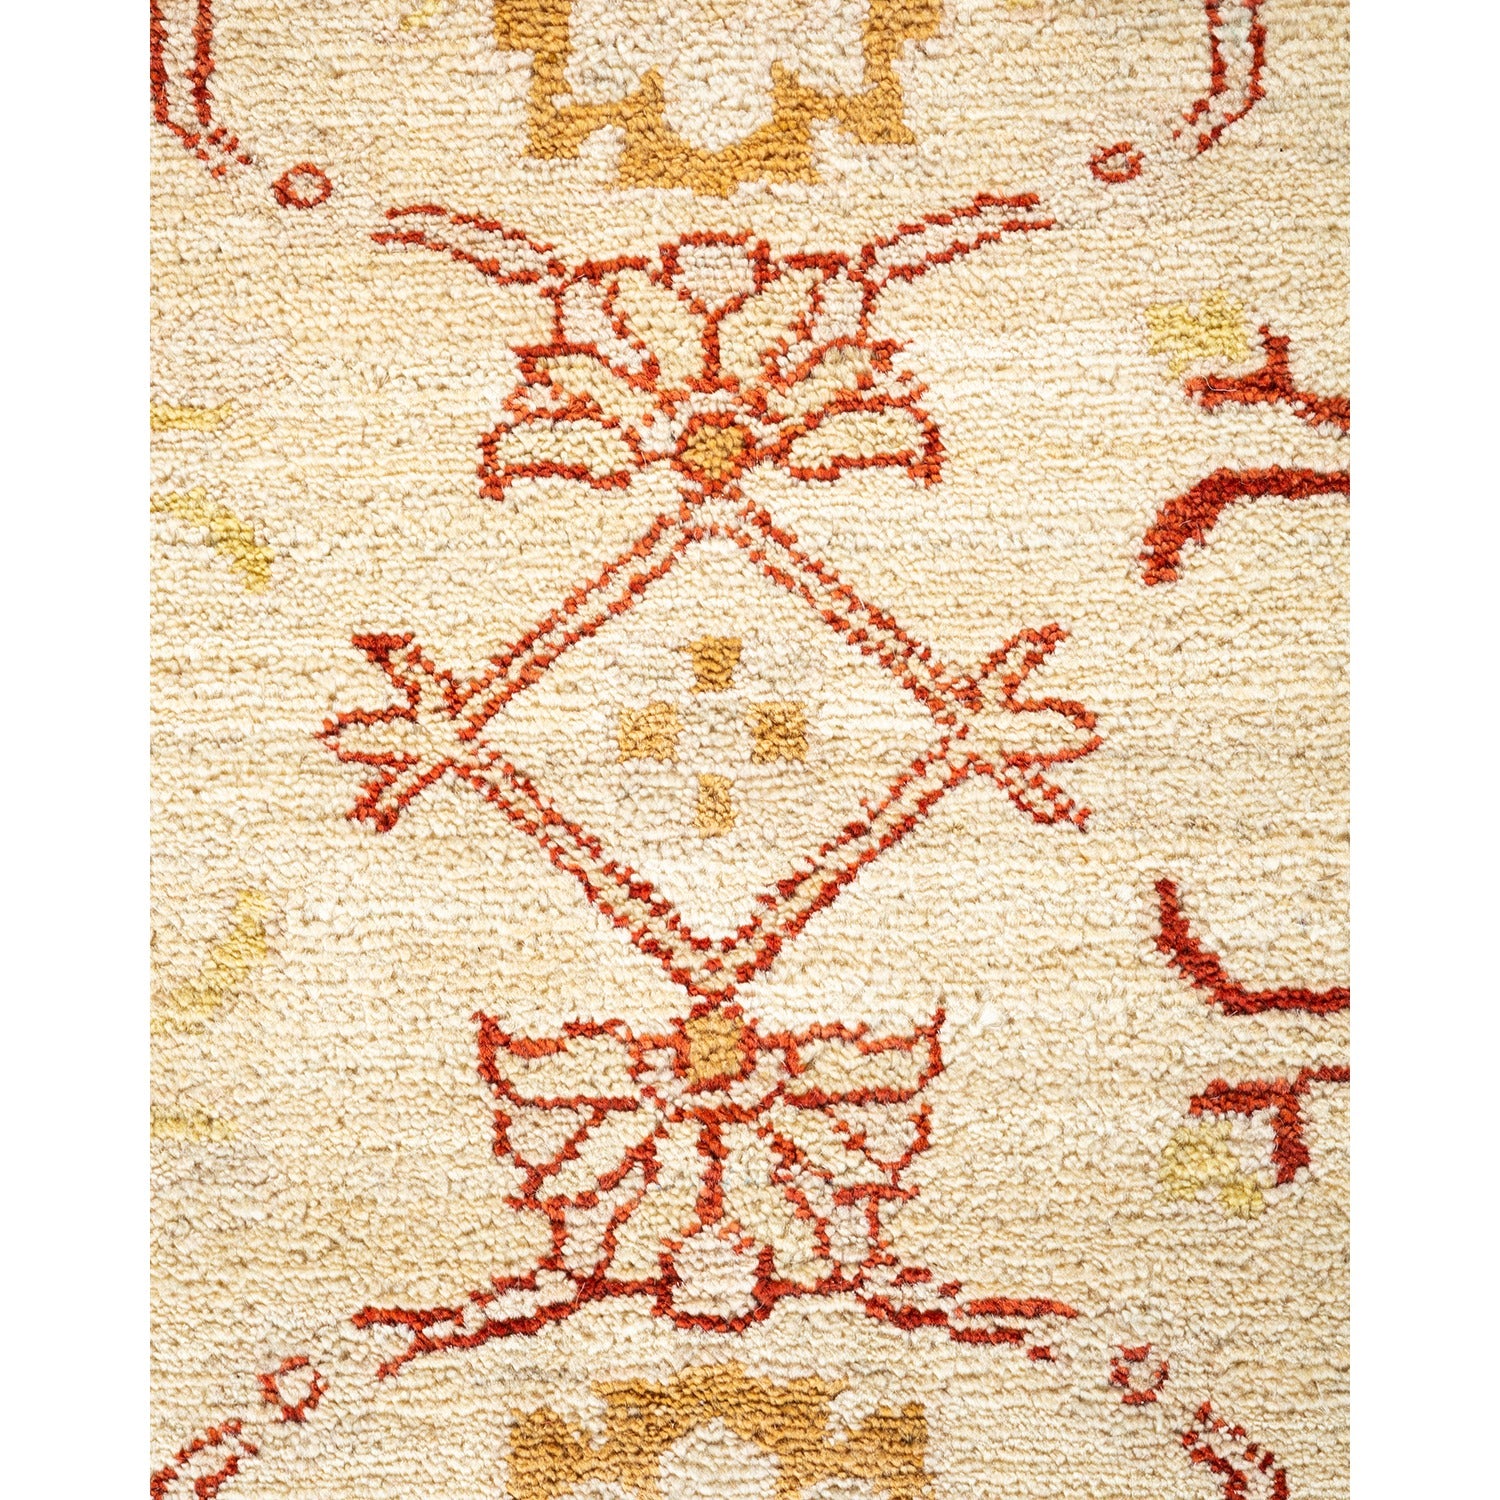 Close-up of a symmetrical, intricate patterned rug in red hues.